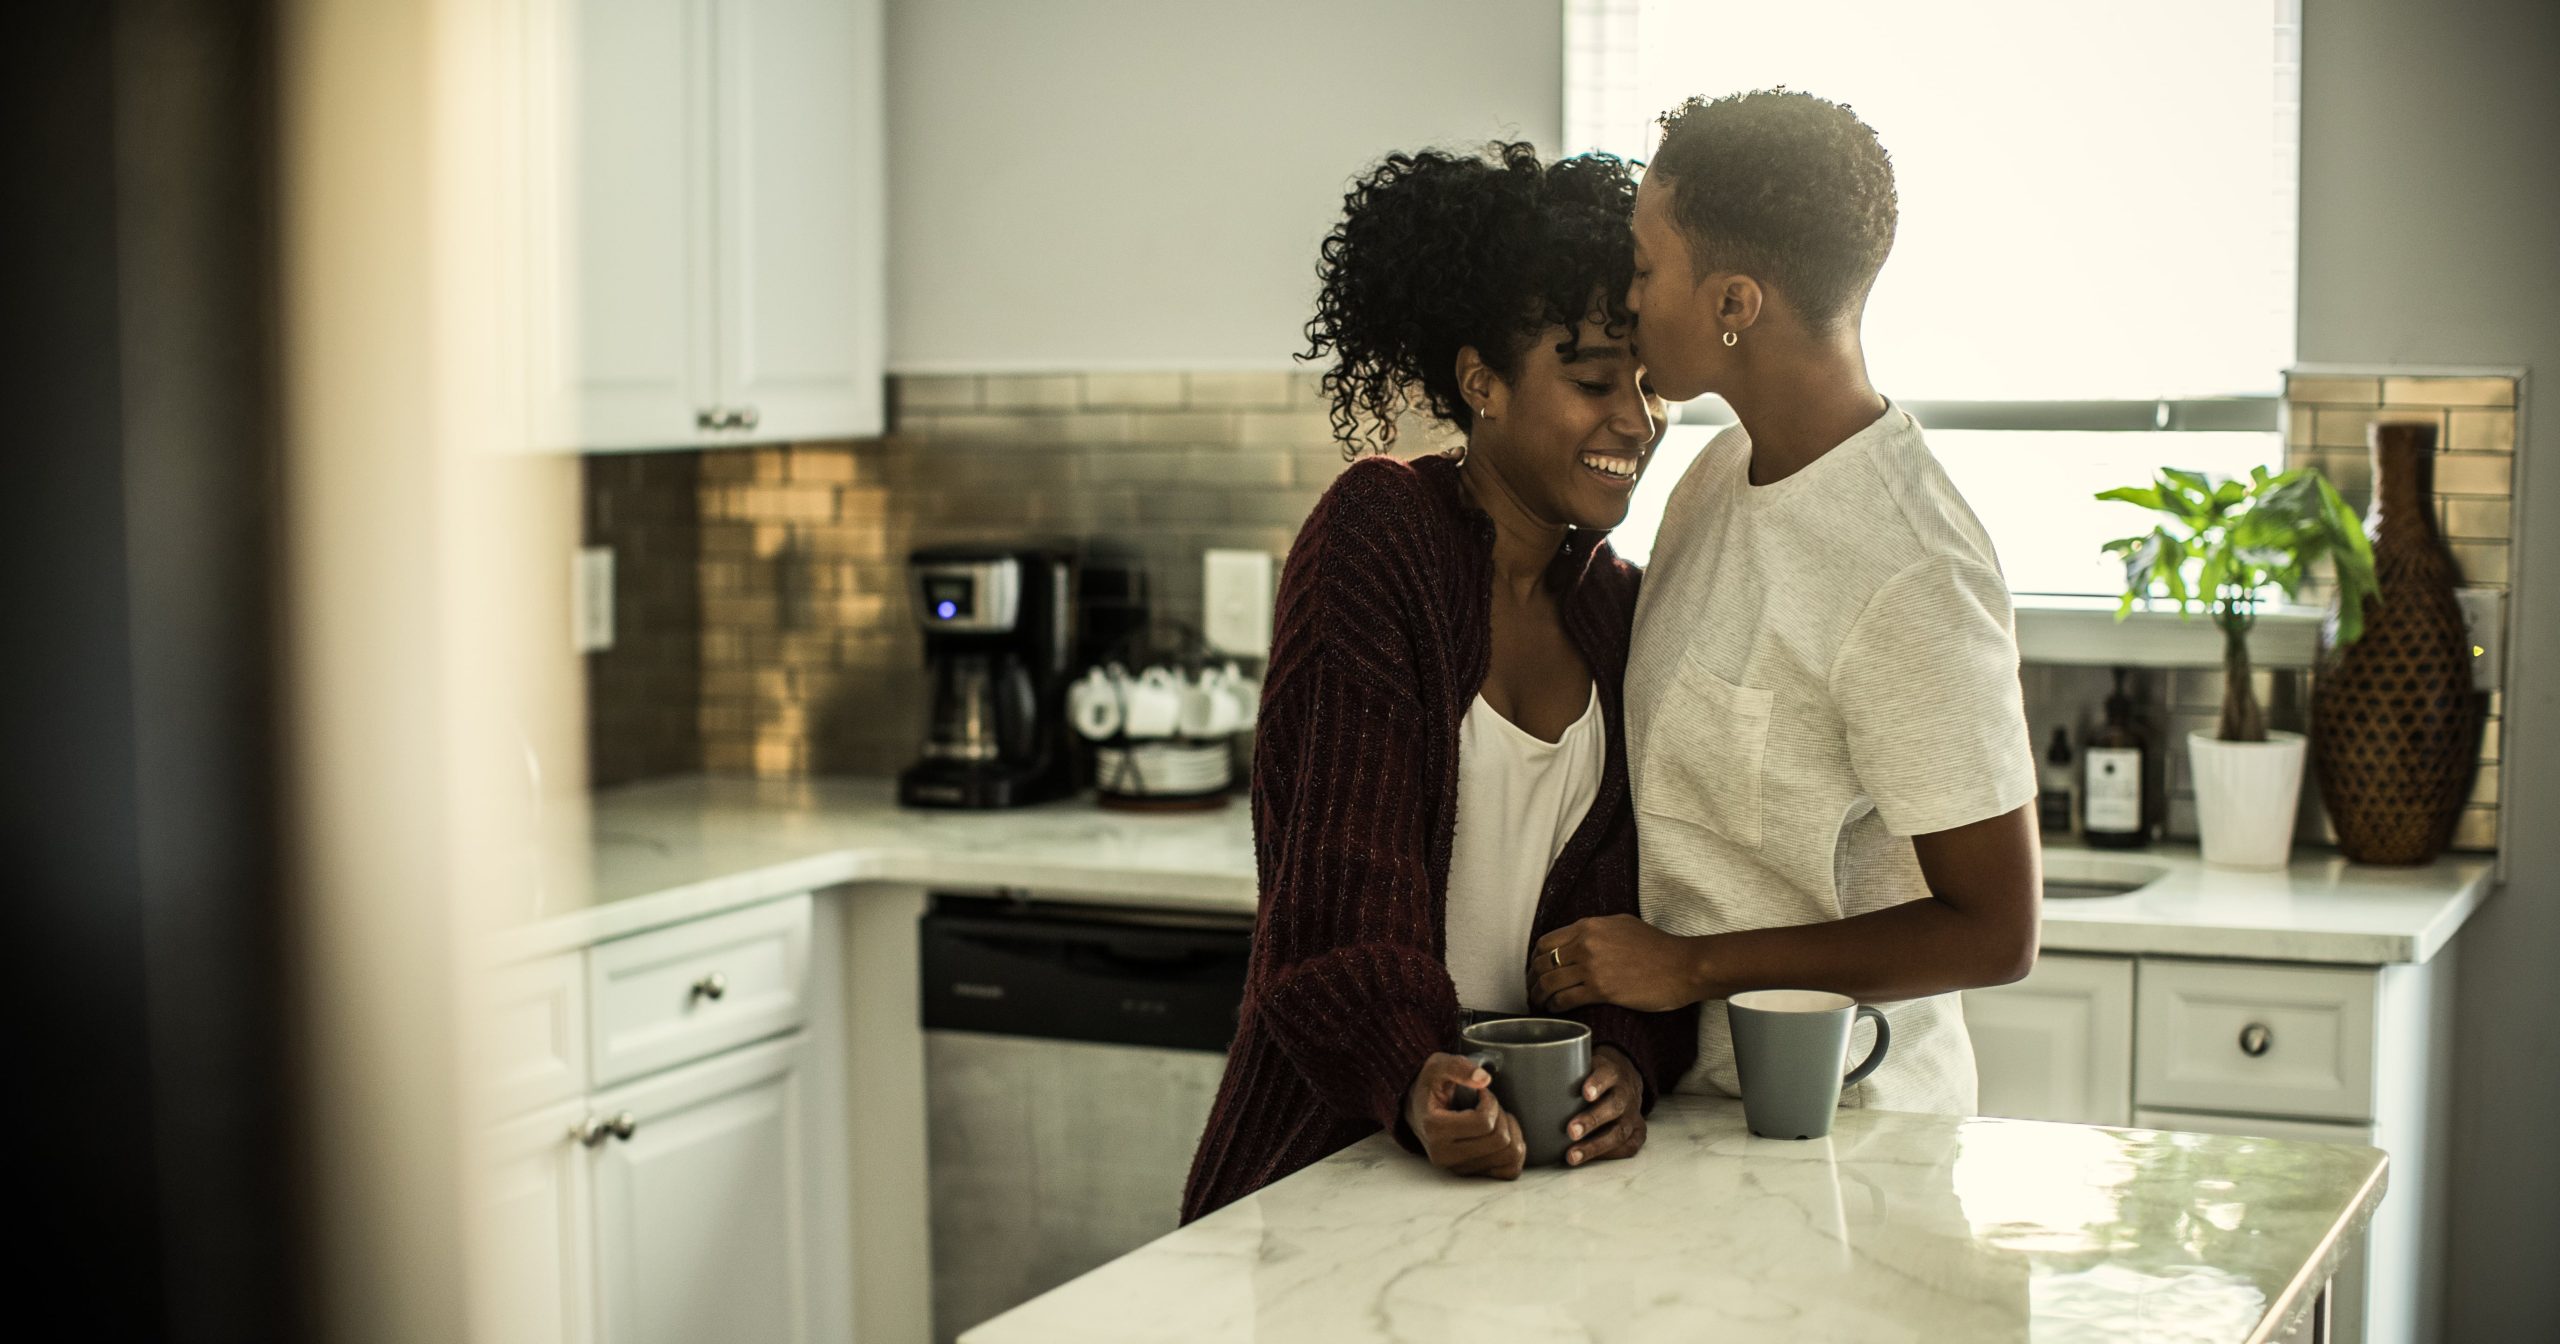 50+ Valentine's Day Ideas That Prove Love Don't Cost a Thing